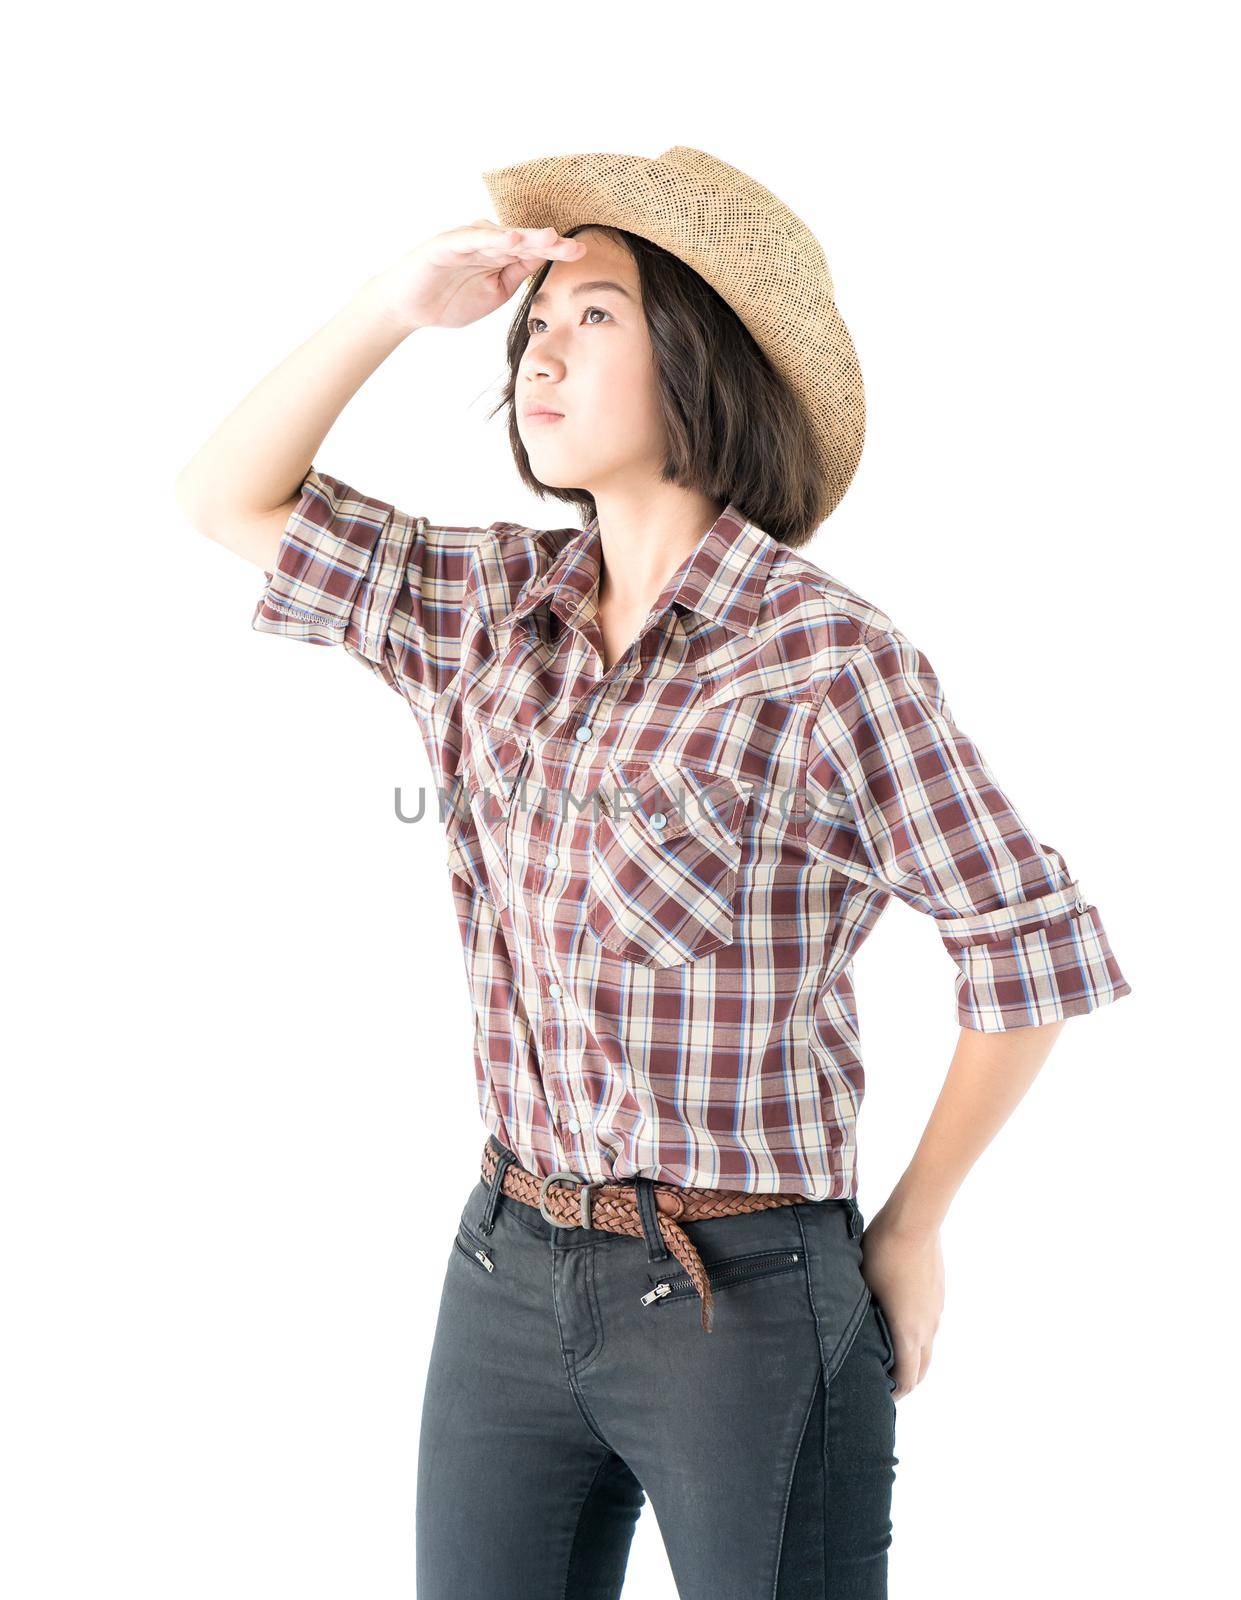 Young woman in a cowboy hat and plaid shirt by stoonn